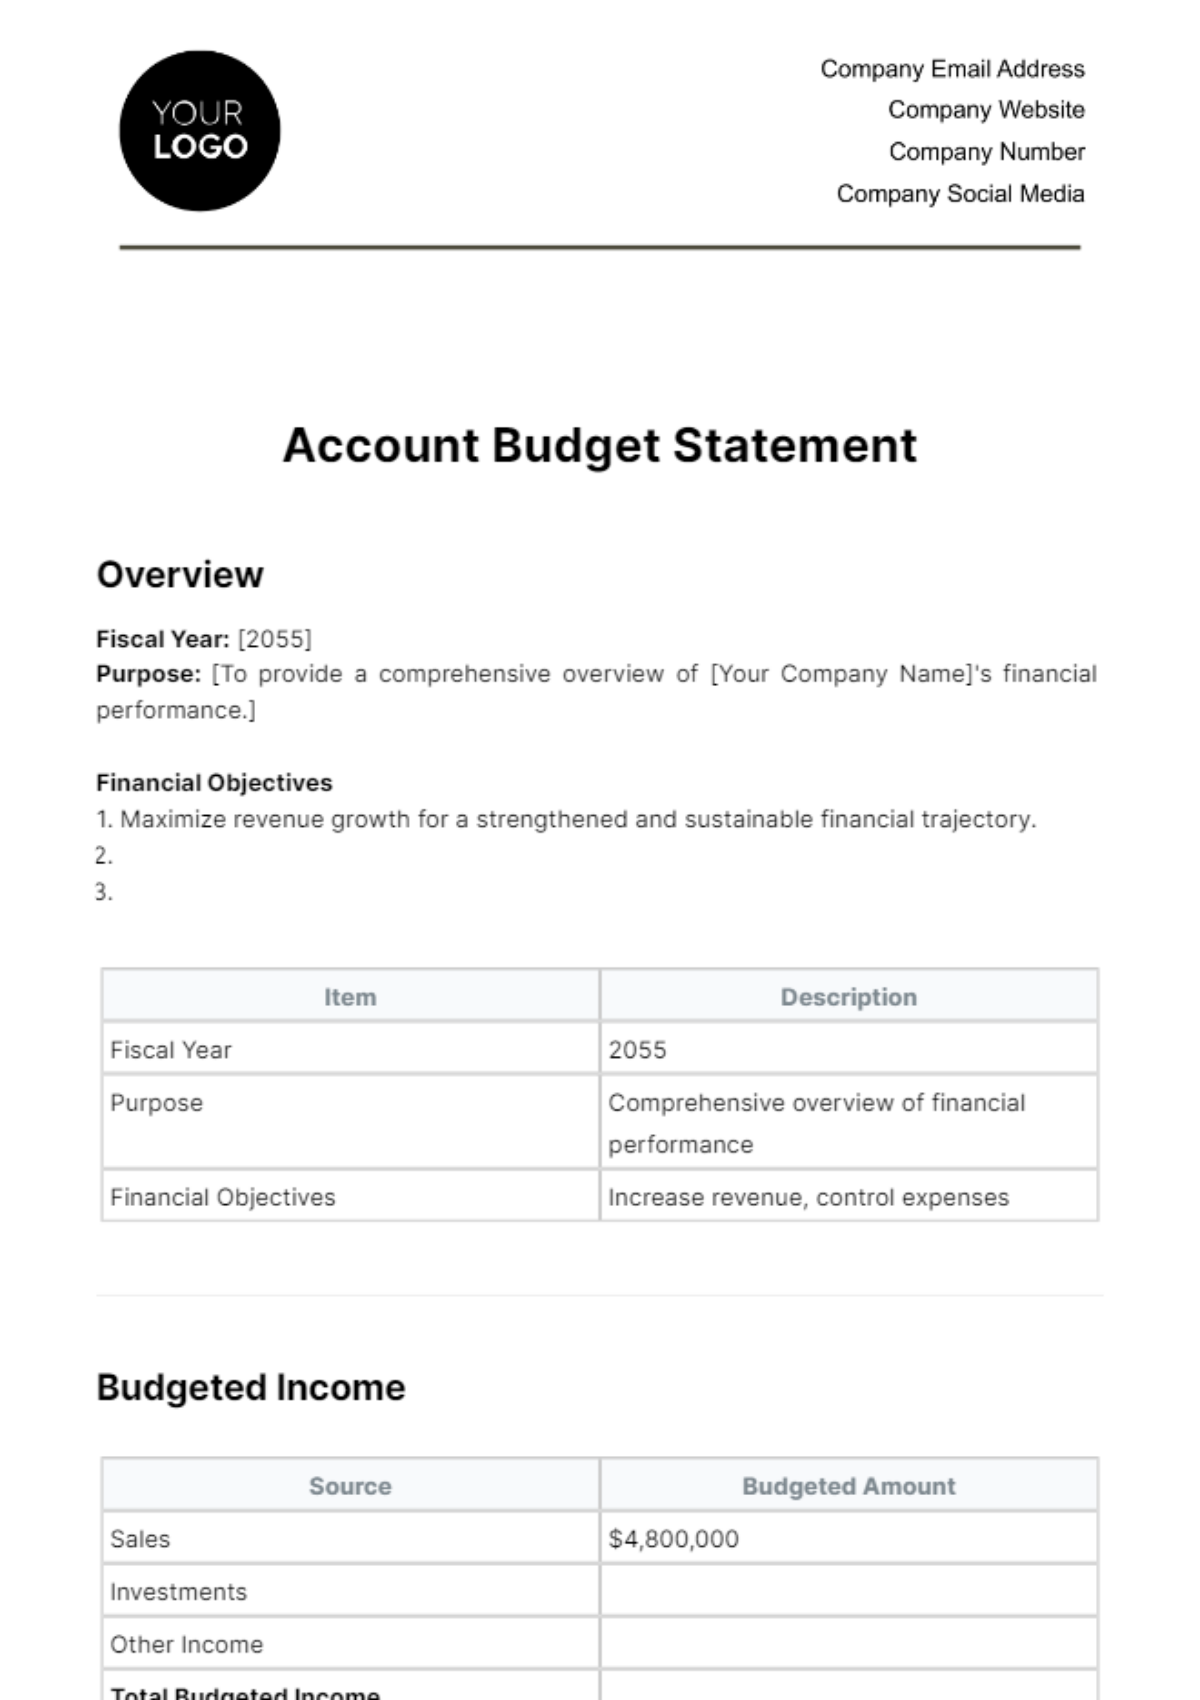 Account Budget Statement Template